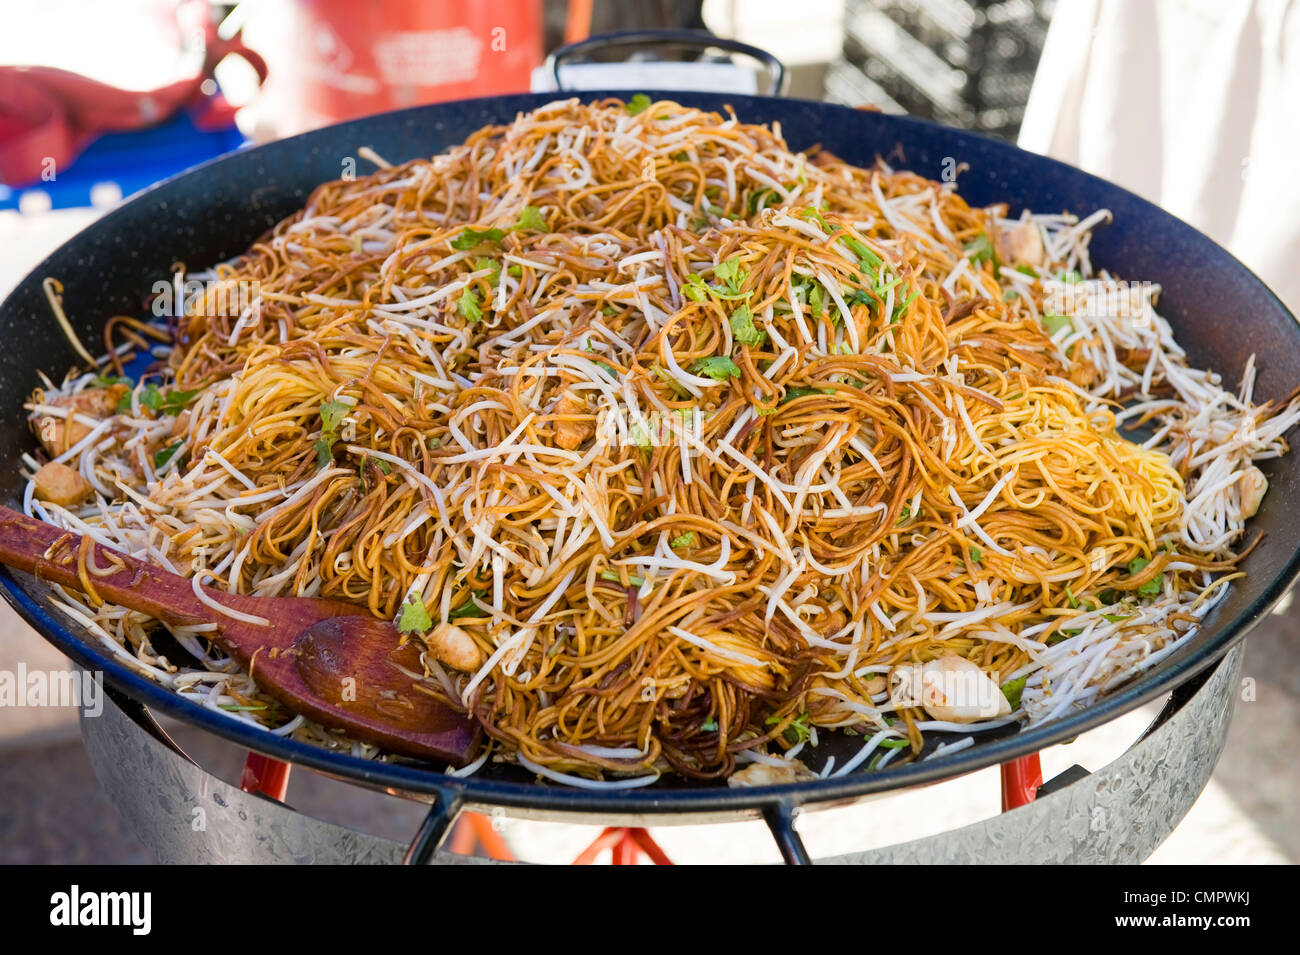 noodles being cooked in a large wok Stock Photo